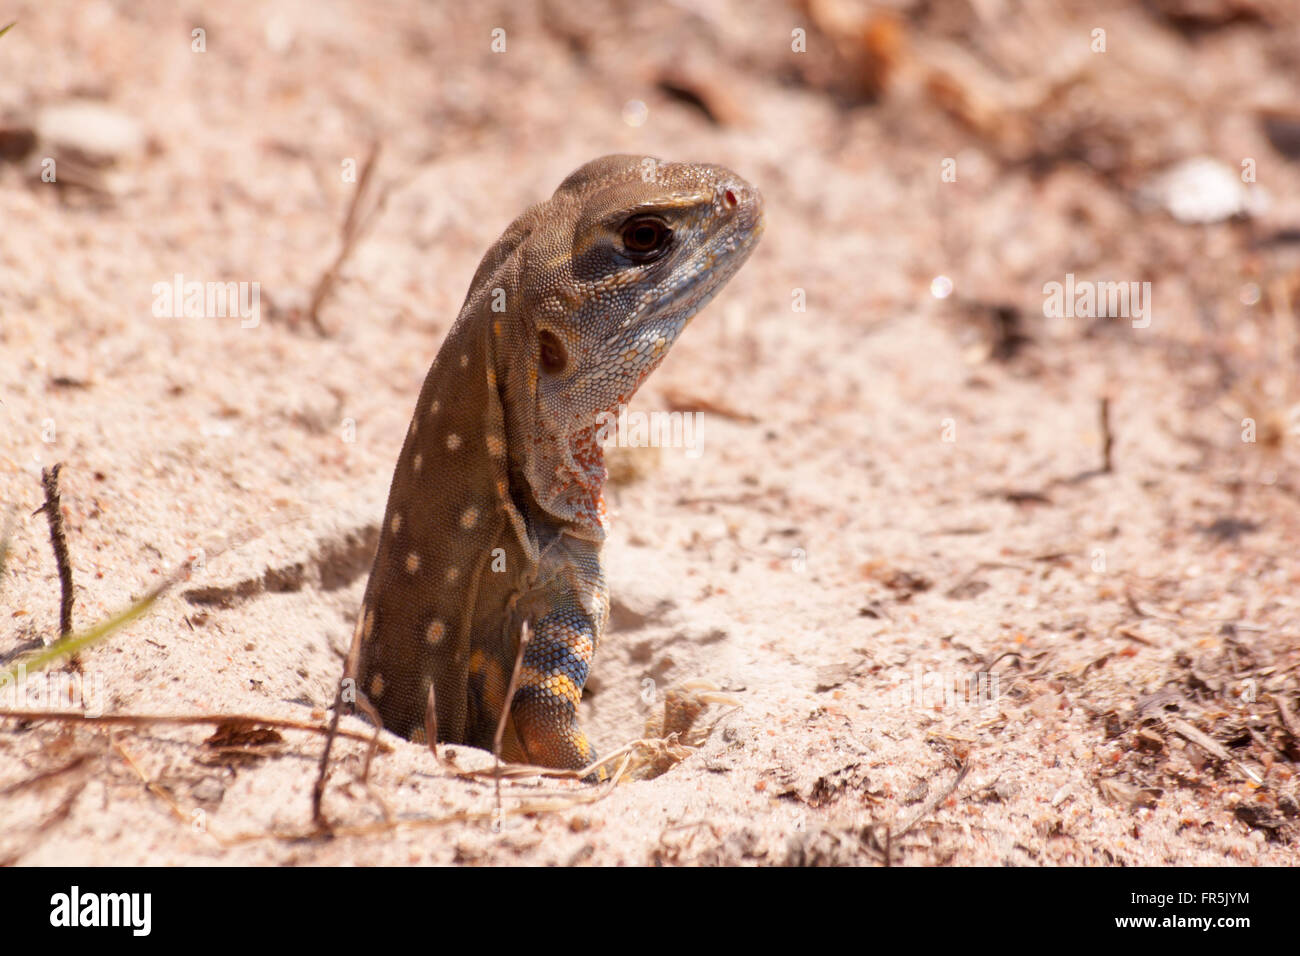 Leiolepis reptile it is colorful color in nature. Leiolepis belliana. Stock Photo